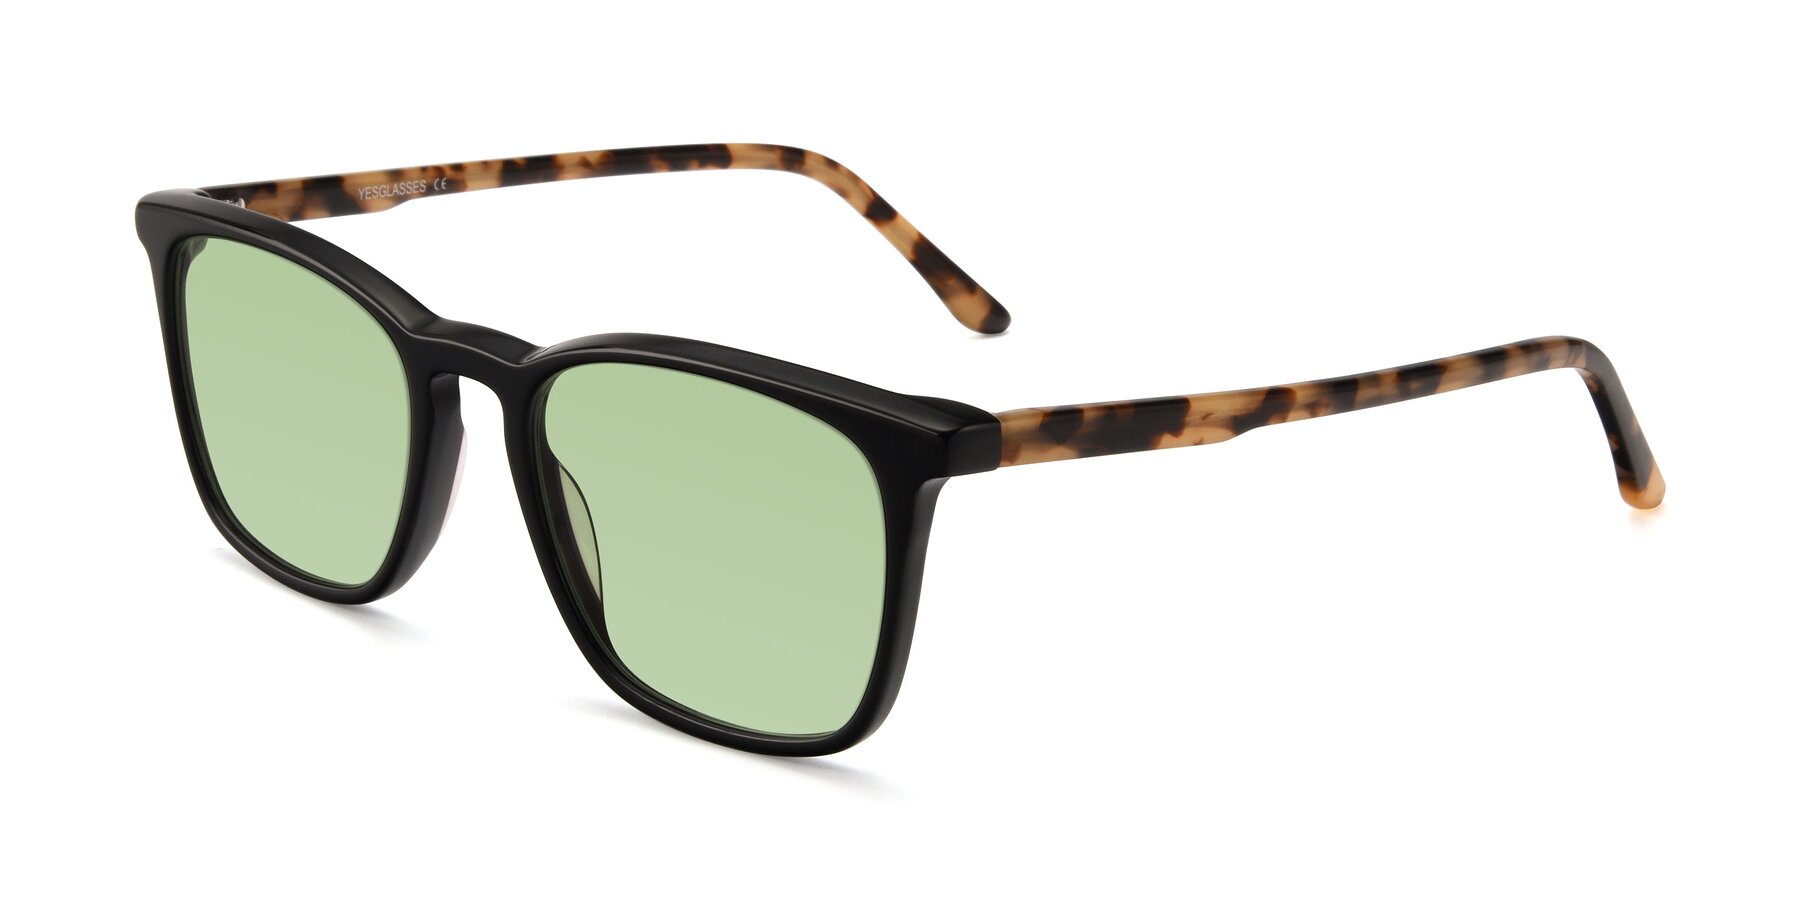 Angle of Vigor in Black-Tortoise with Medium Green Tinted Lenses